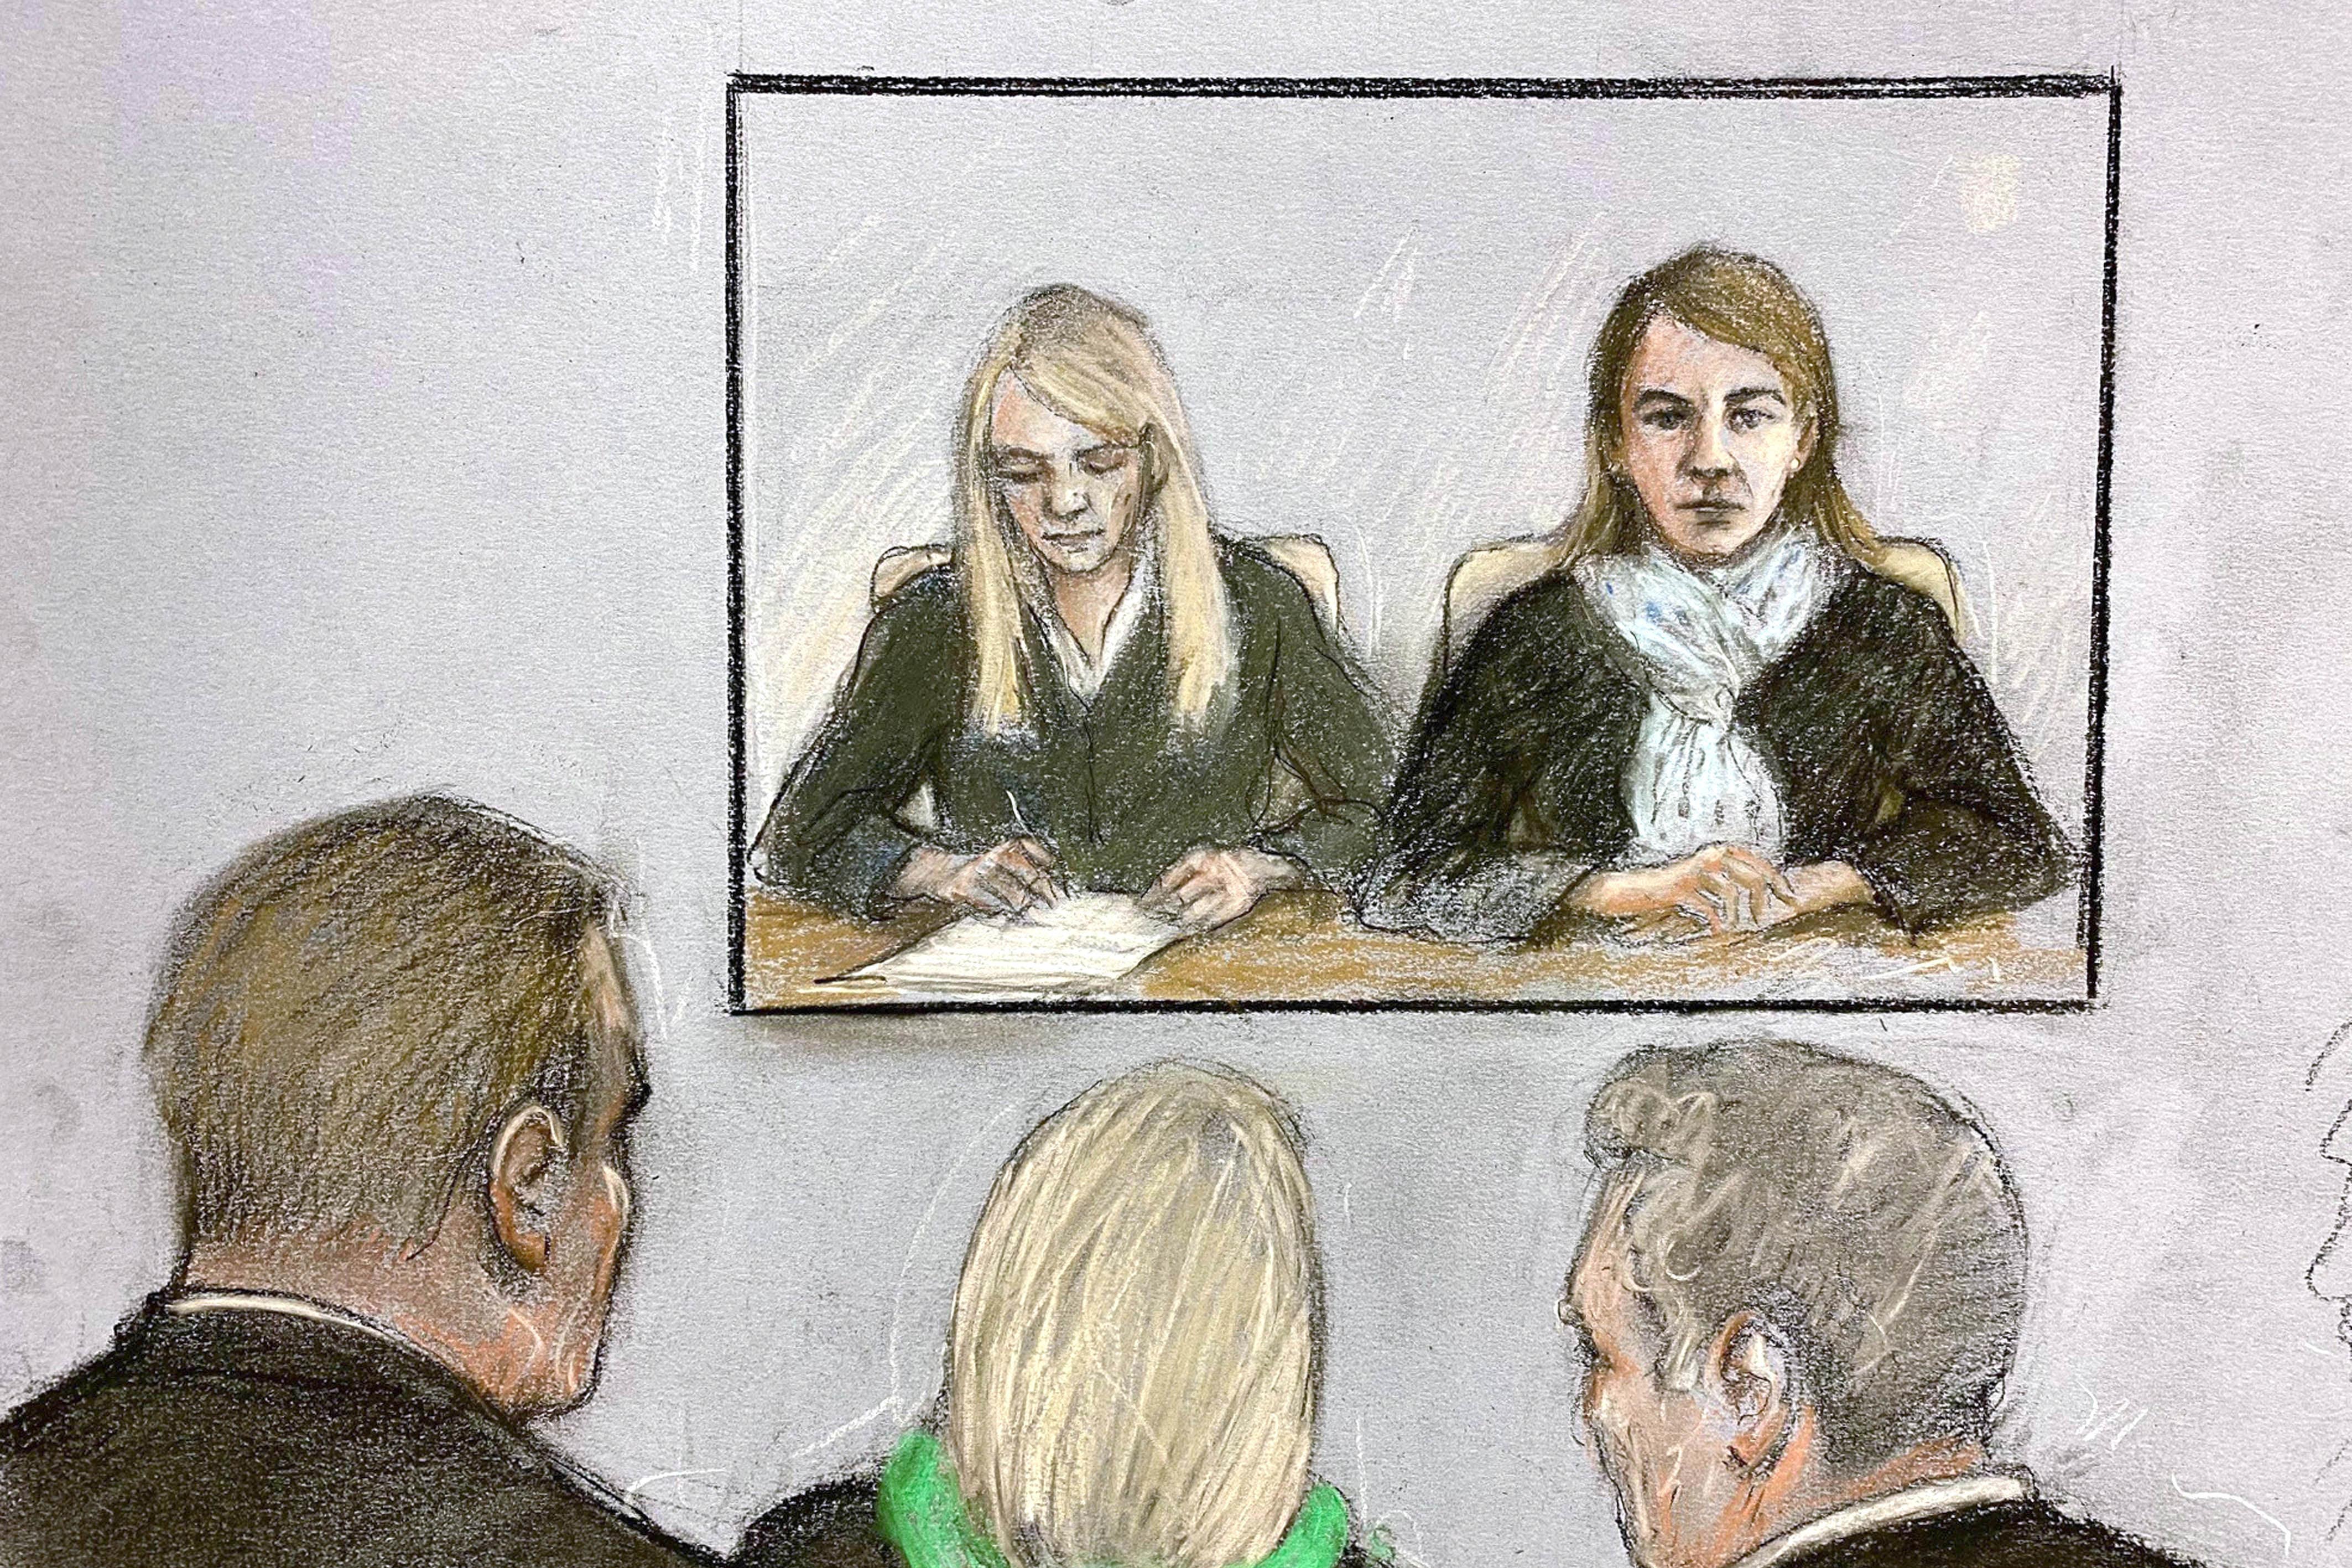 Court sketch of US citizen Anne Sacoolas (right in TV screen)